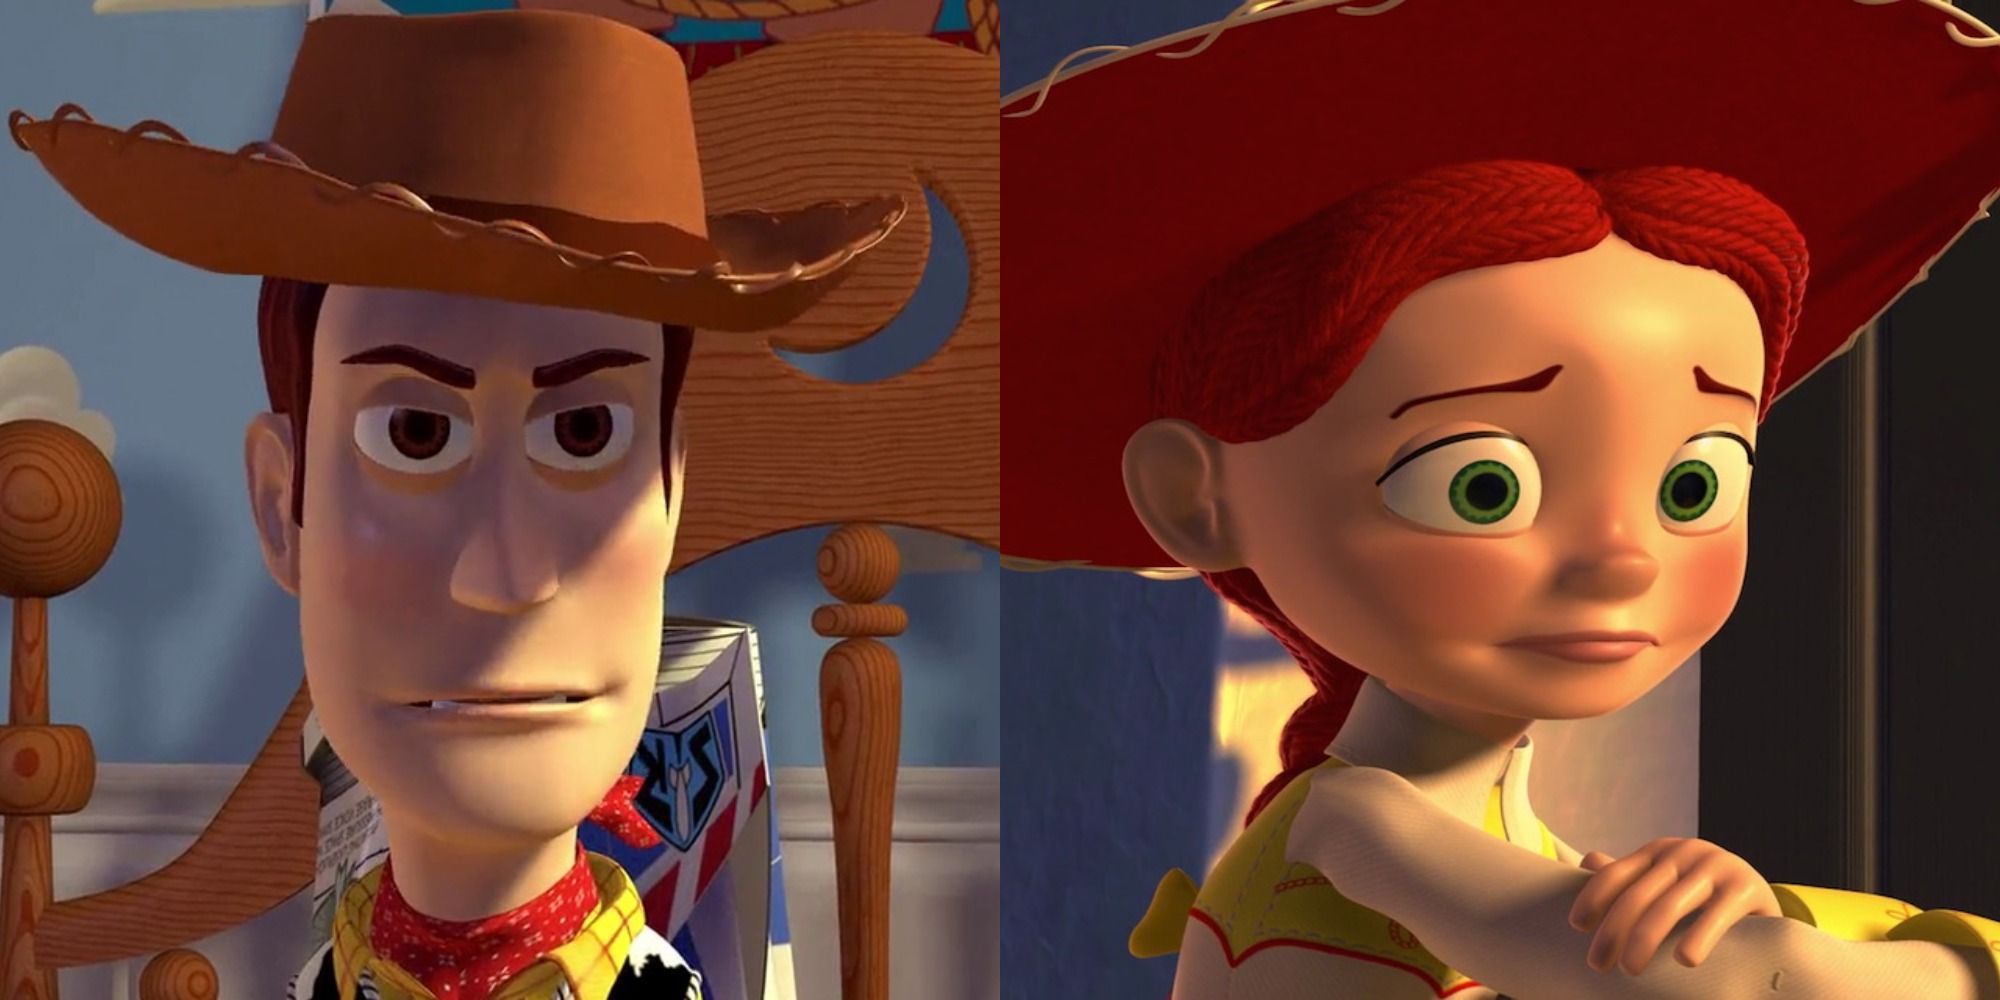 Toy Story' Fans Are Upset After Realizing New Name Scribbled on Woody's Boot